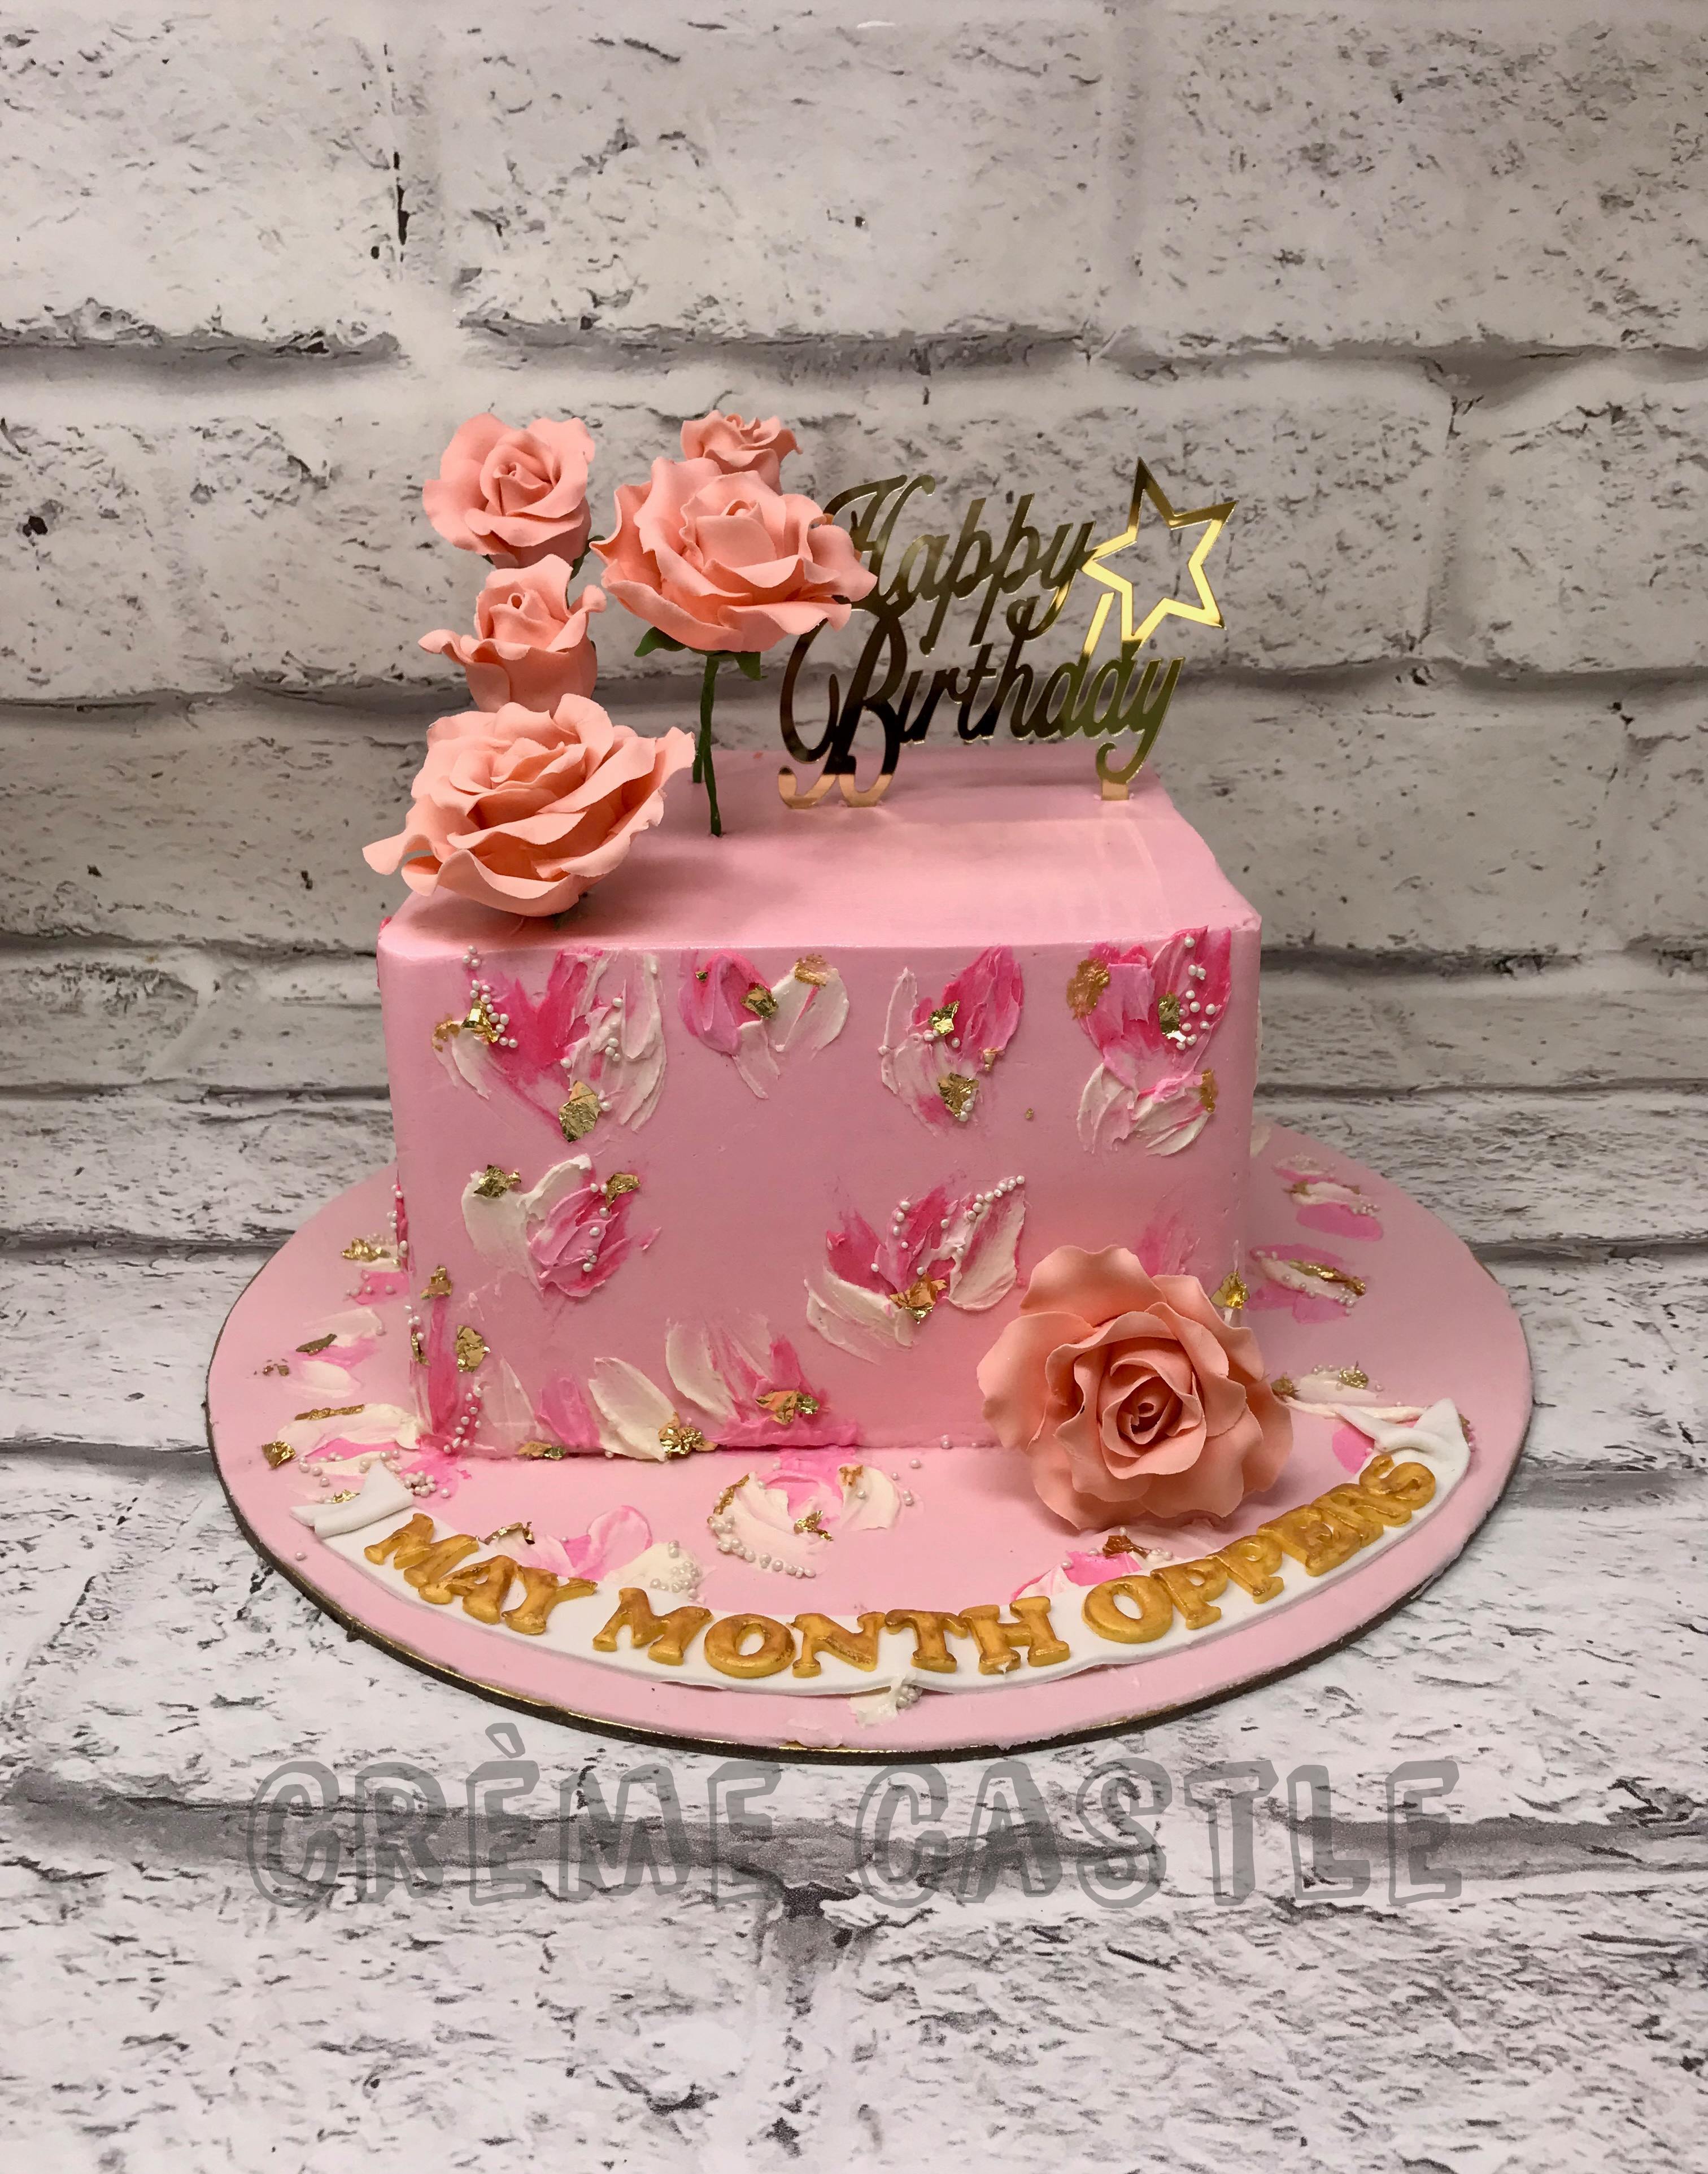 Tiny's Pink Floral Birthday Cake 🌸... - Maria Dean Cakes | Facebook